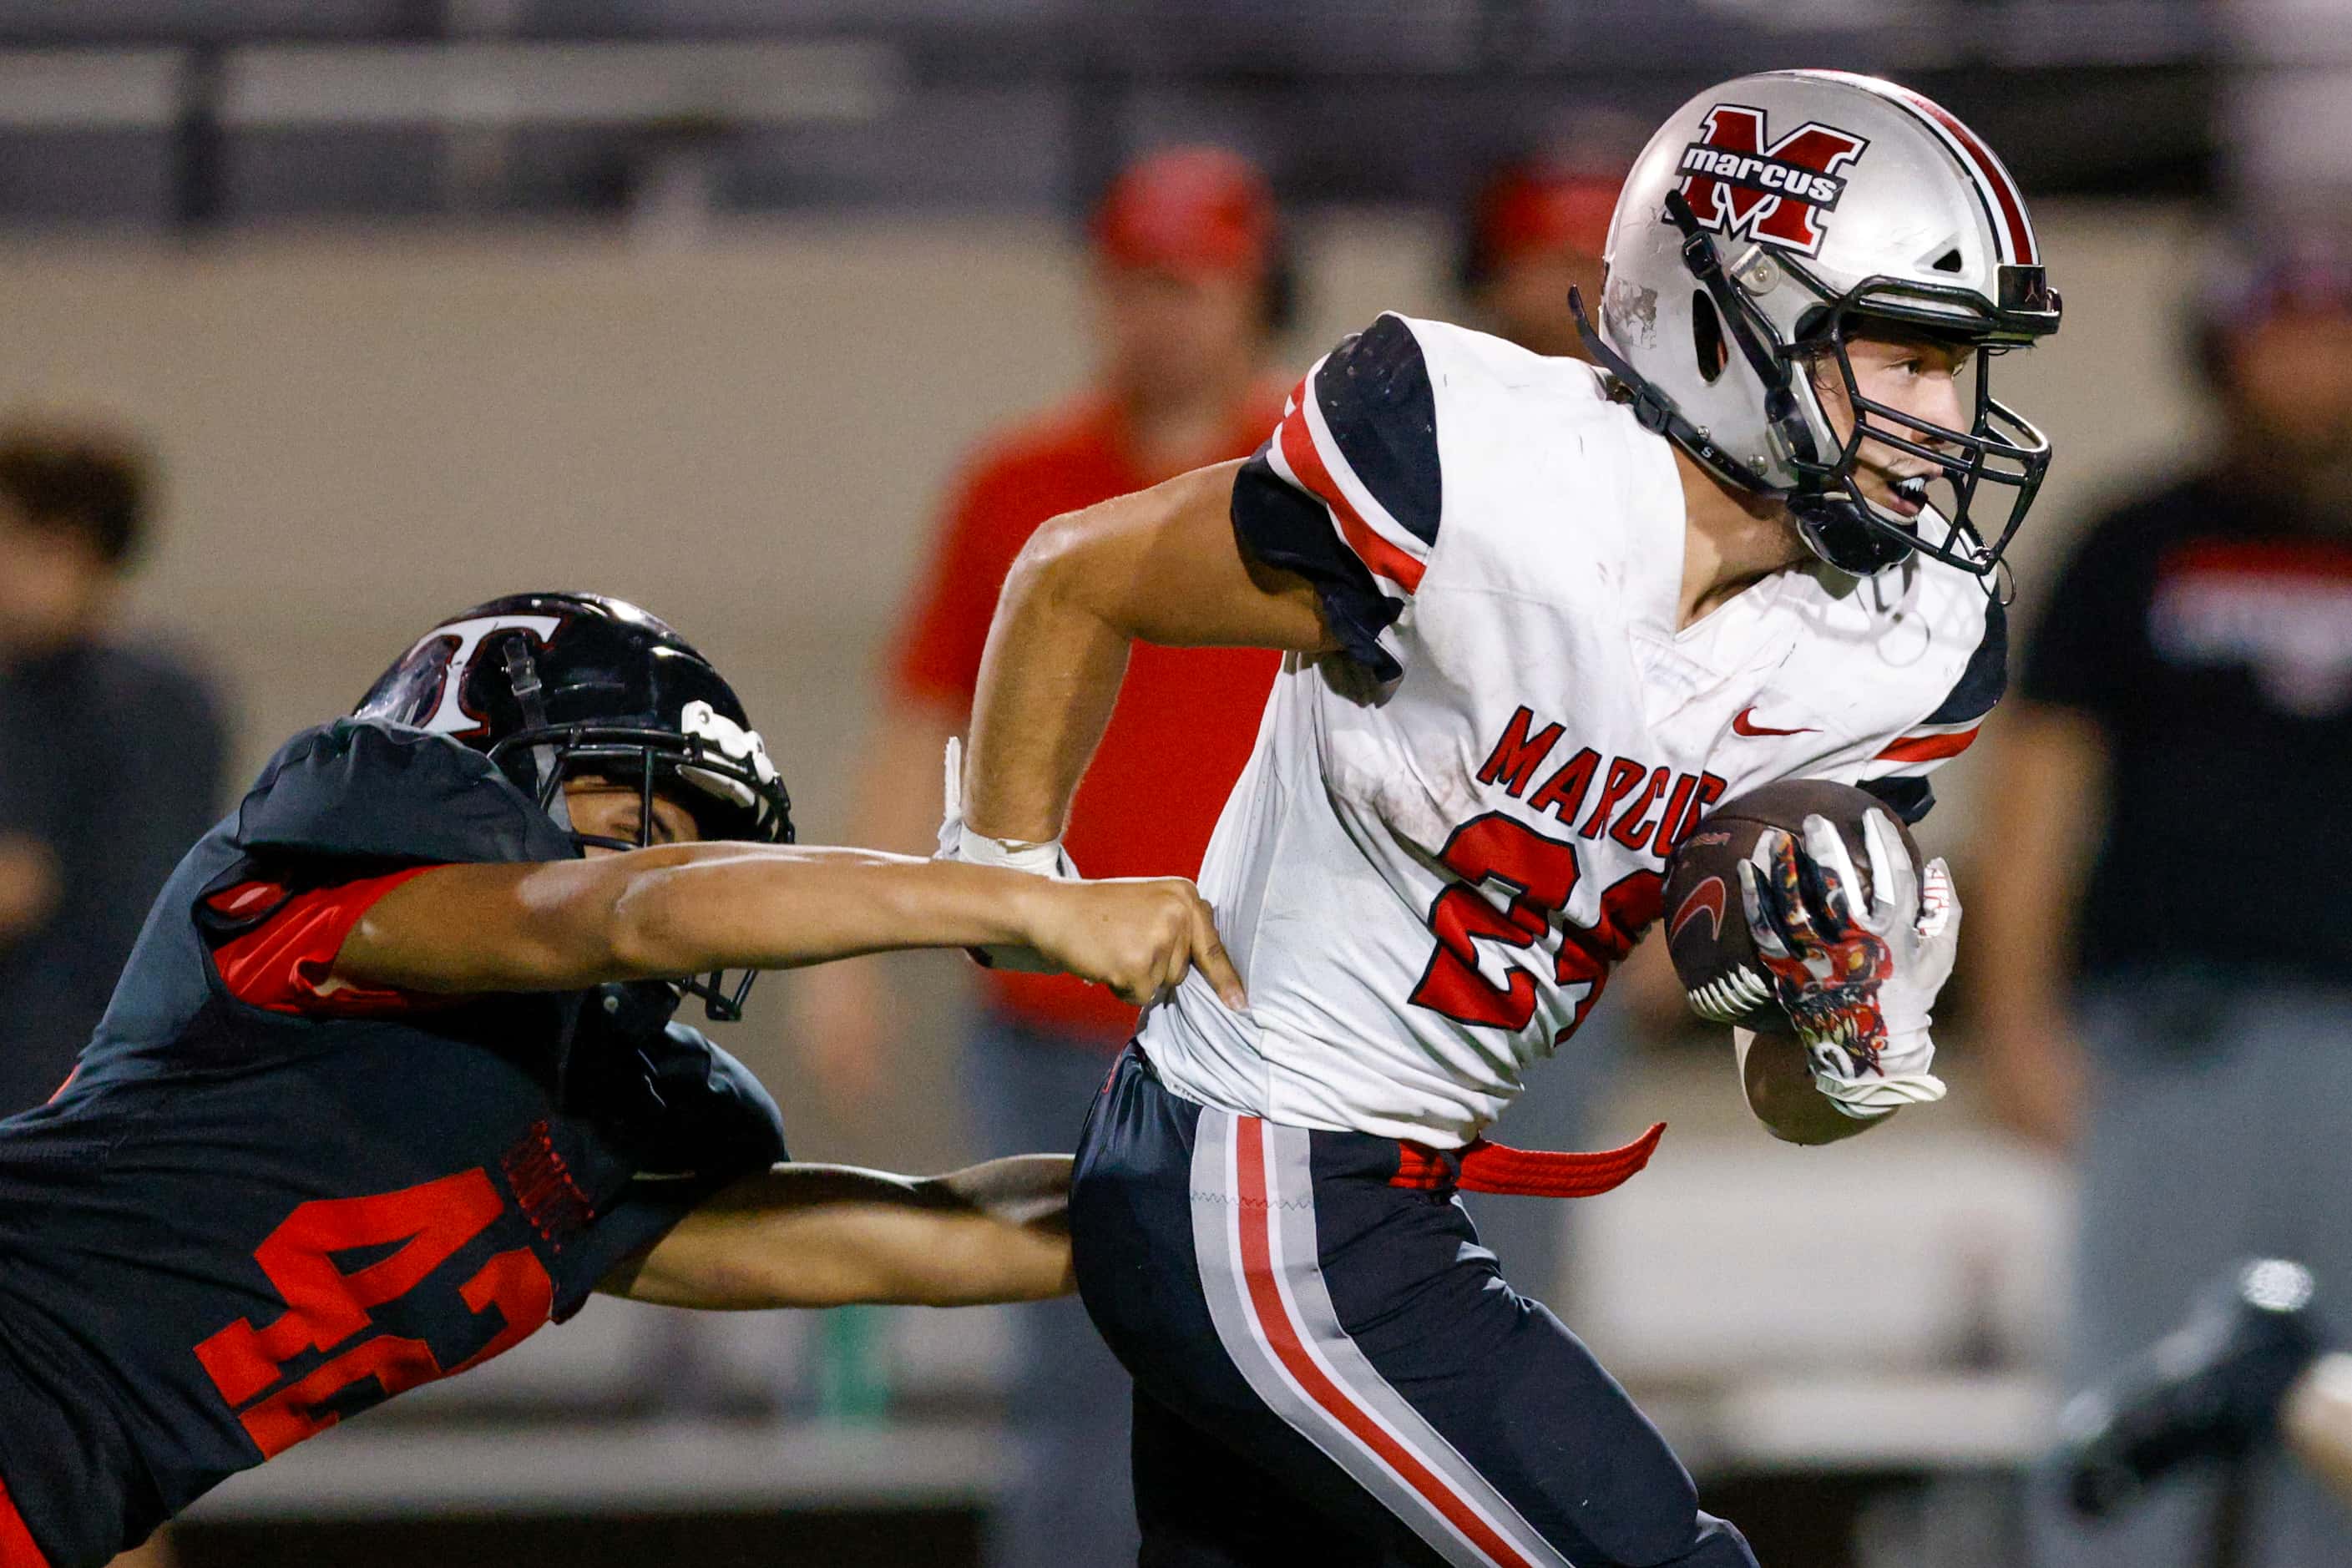 Flower Mound Marcus running back Isiah Keliikipi (24) slips a tackle from Euless Trinity...